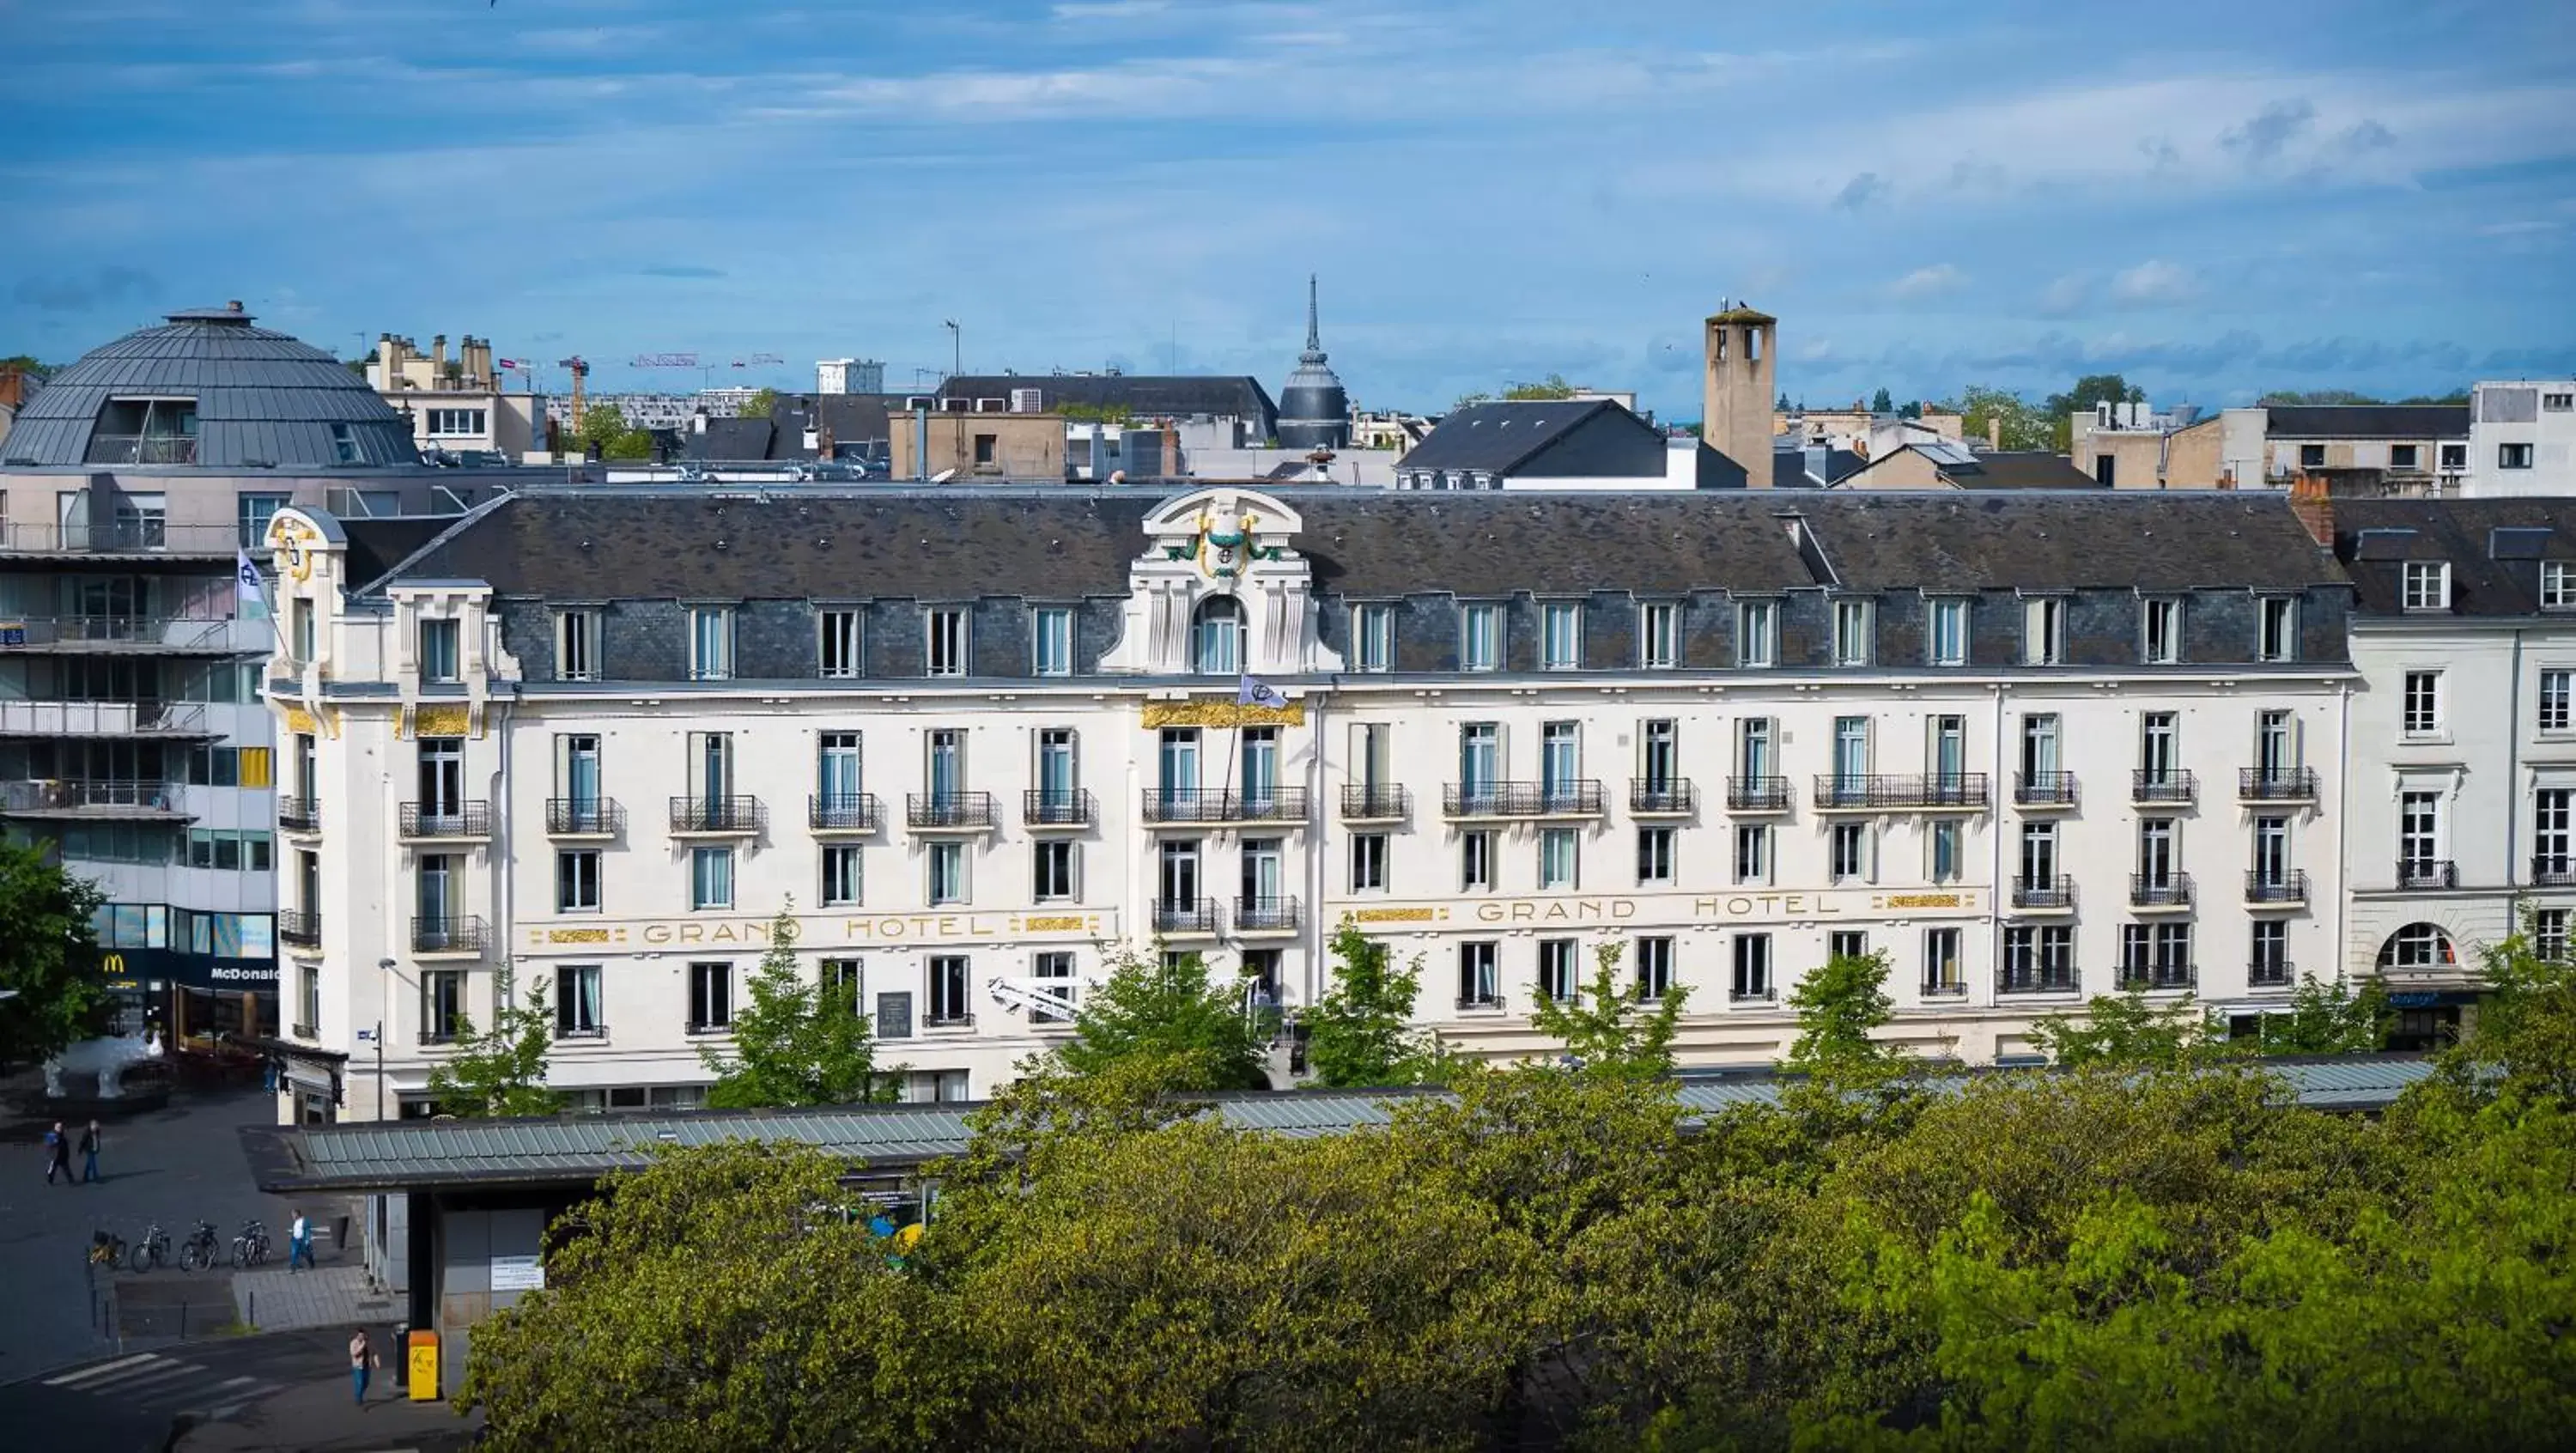 Property building in Le Grand Hotel